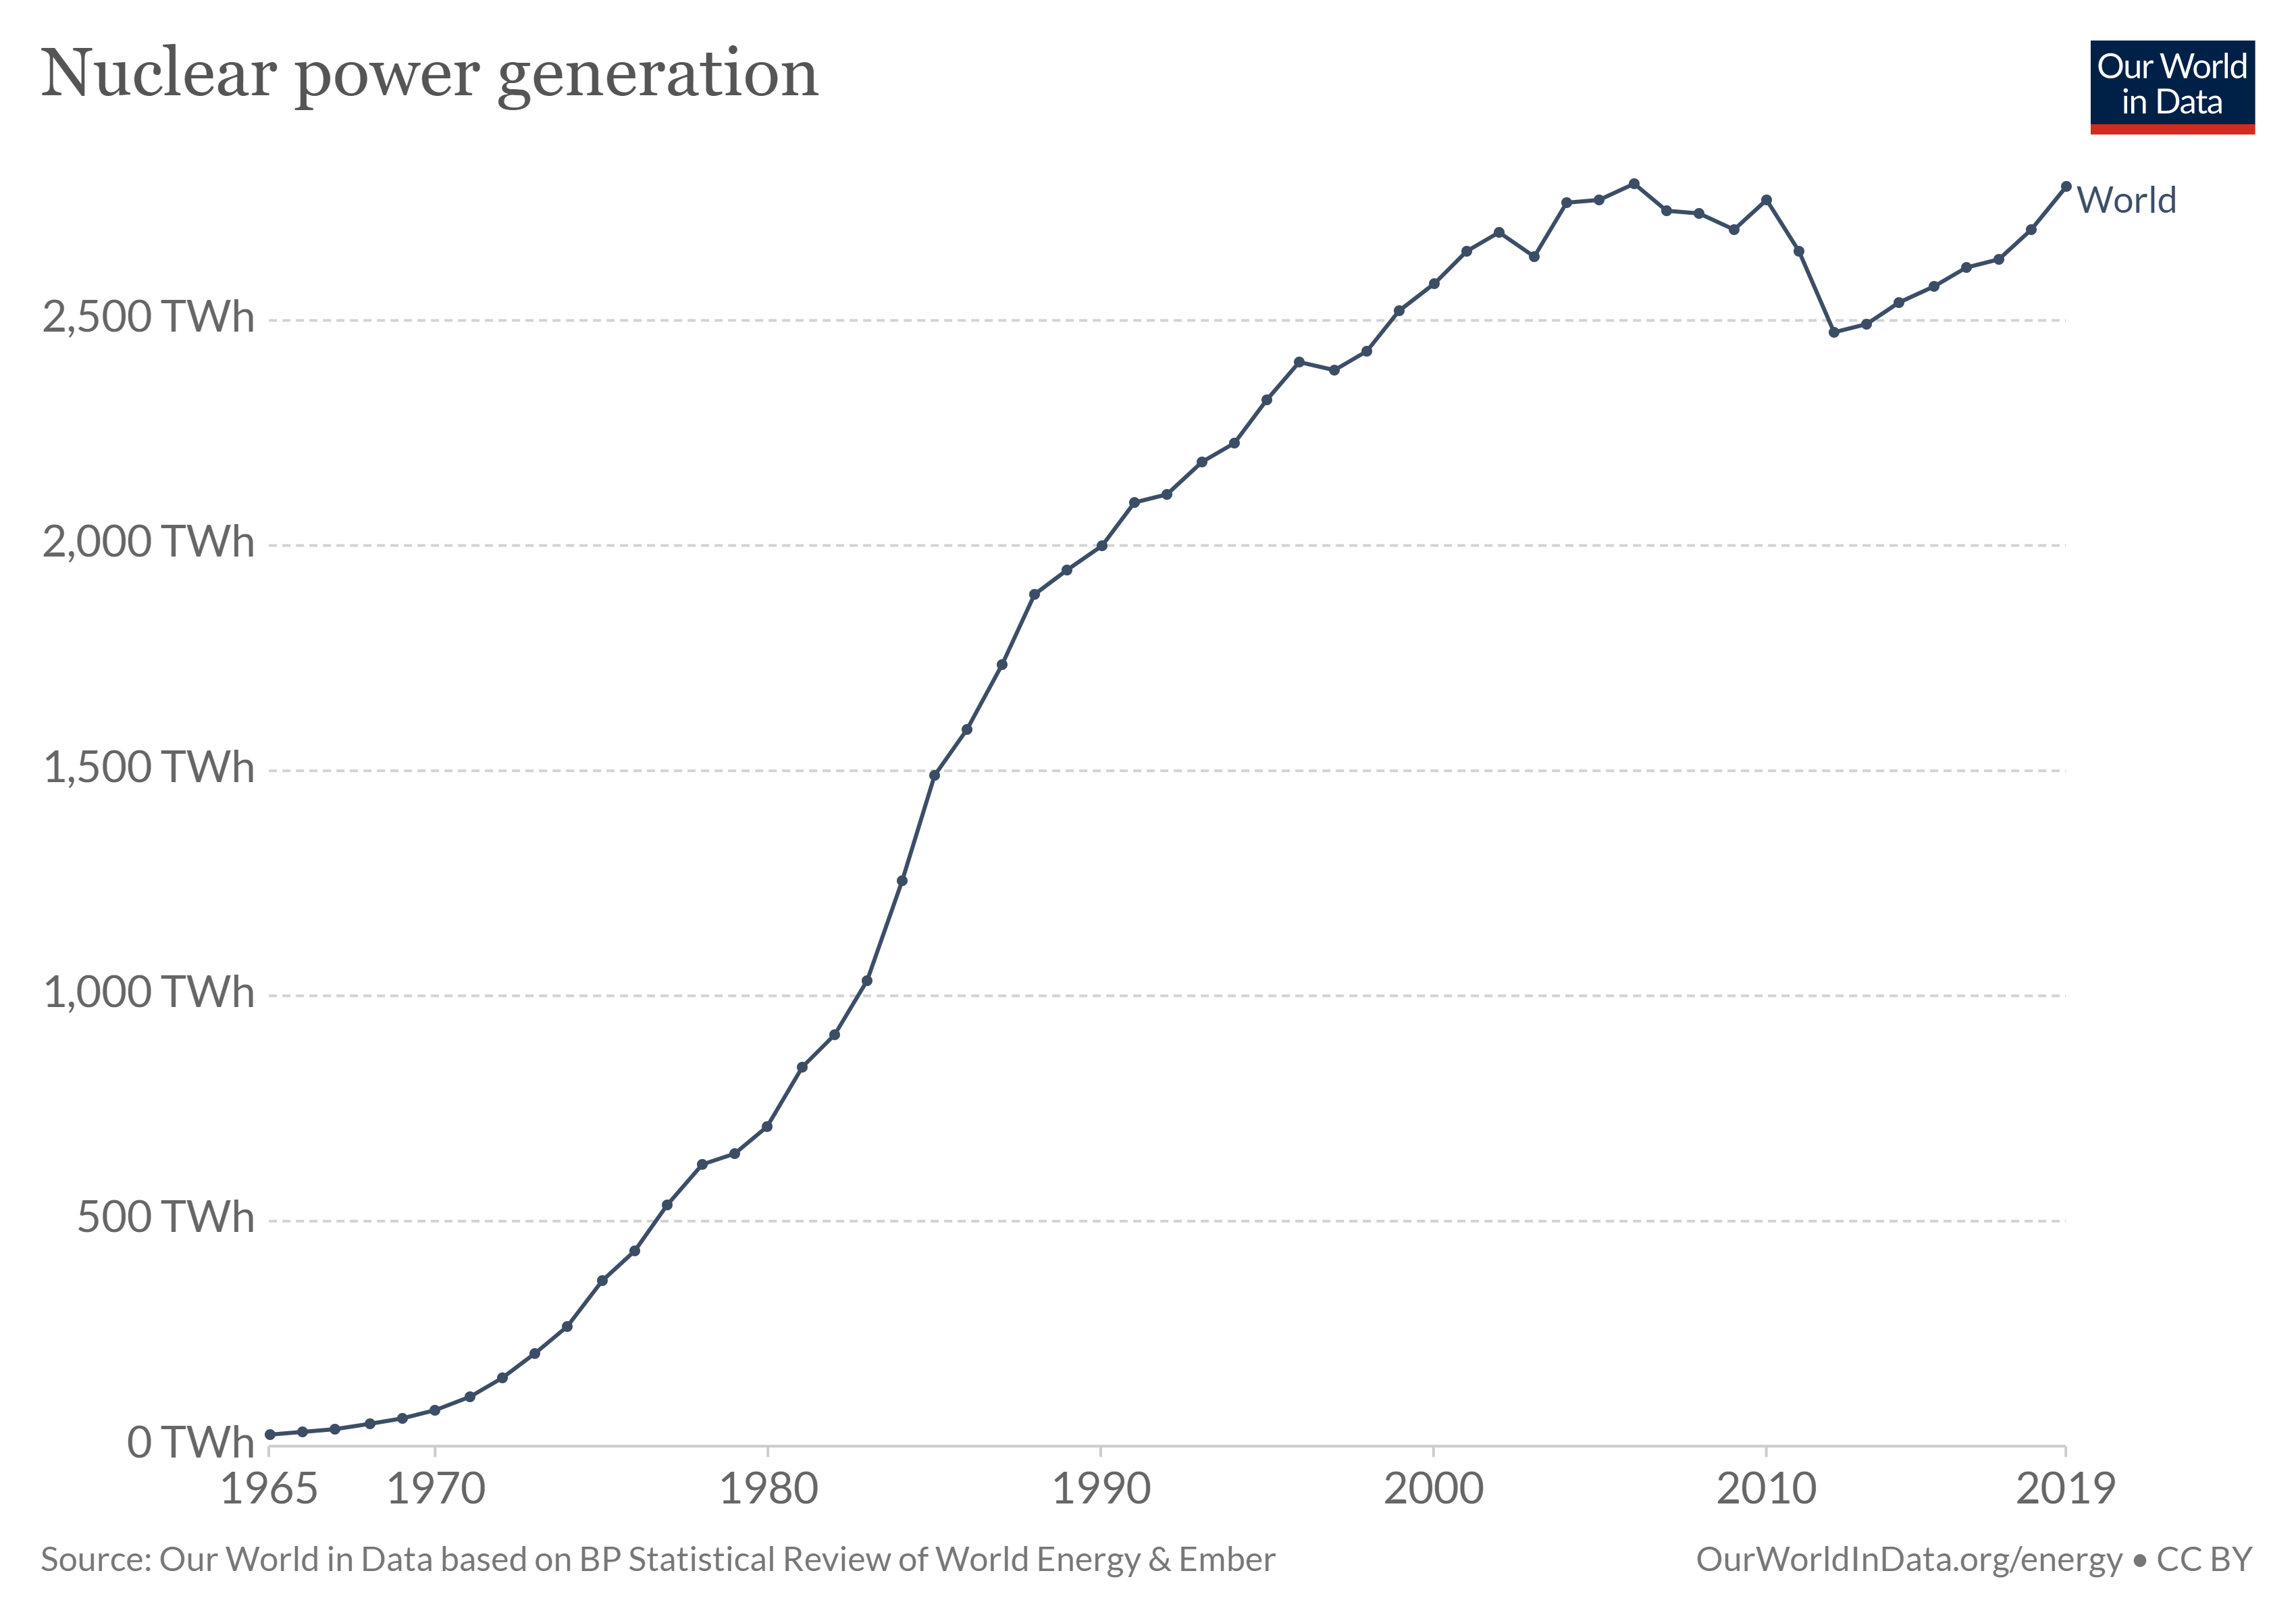 Line graph of nuclear power generation over time